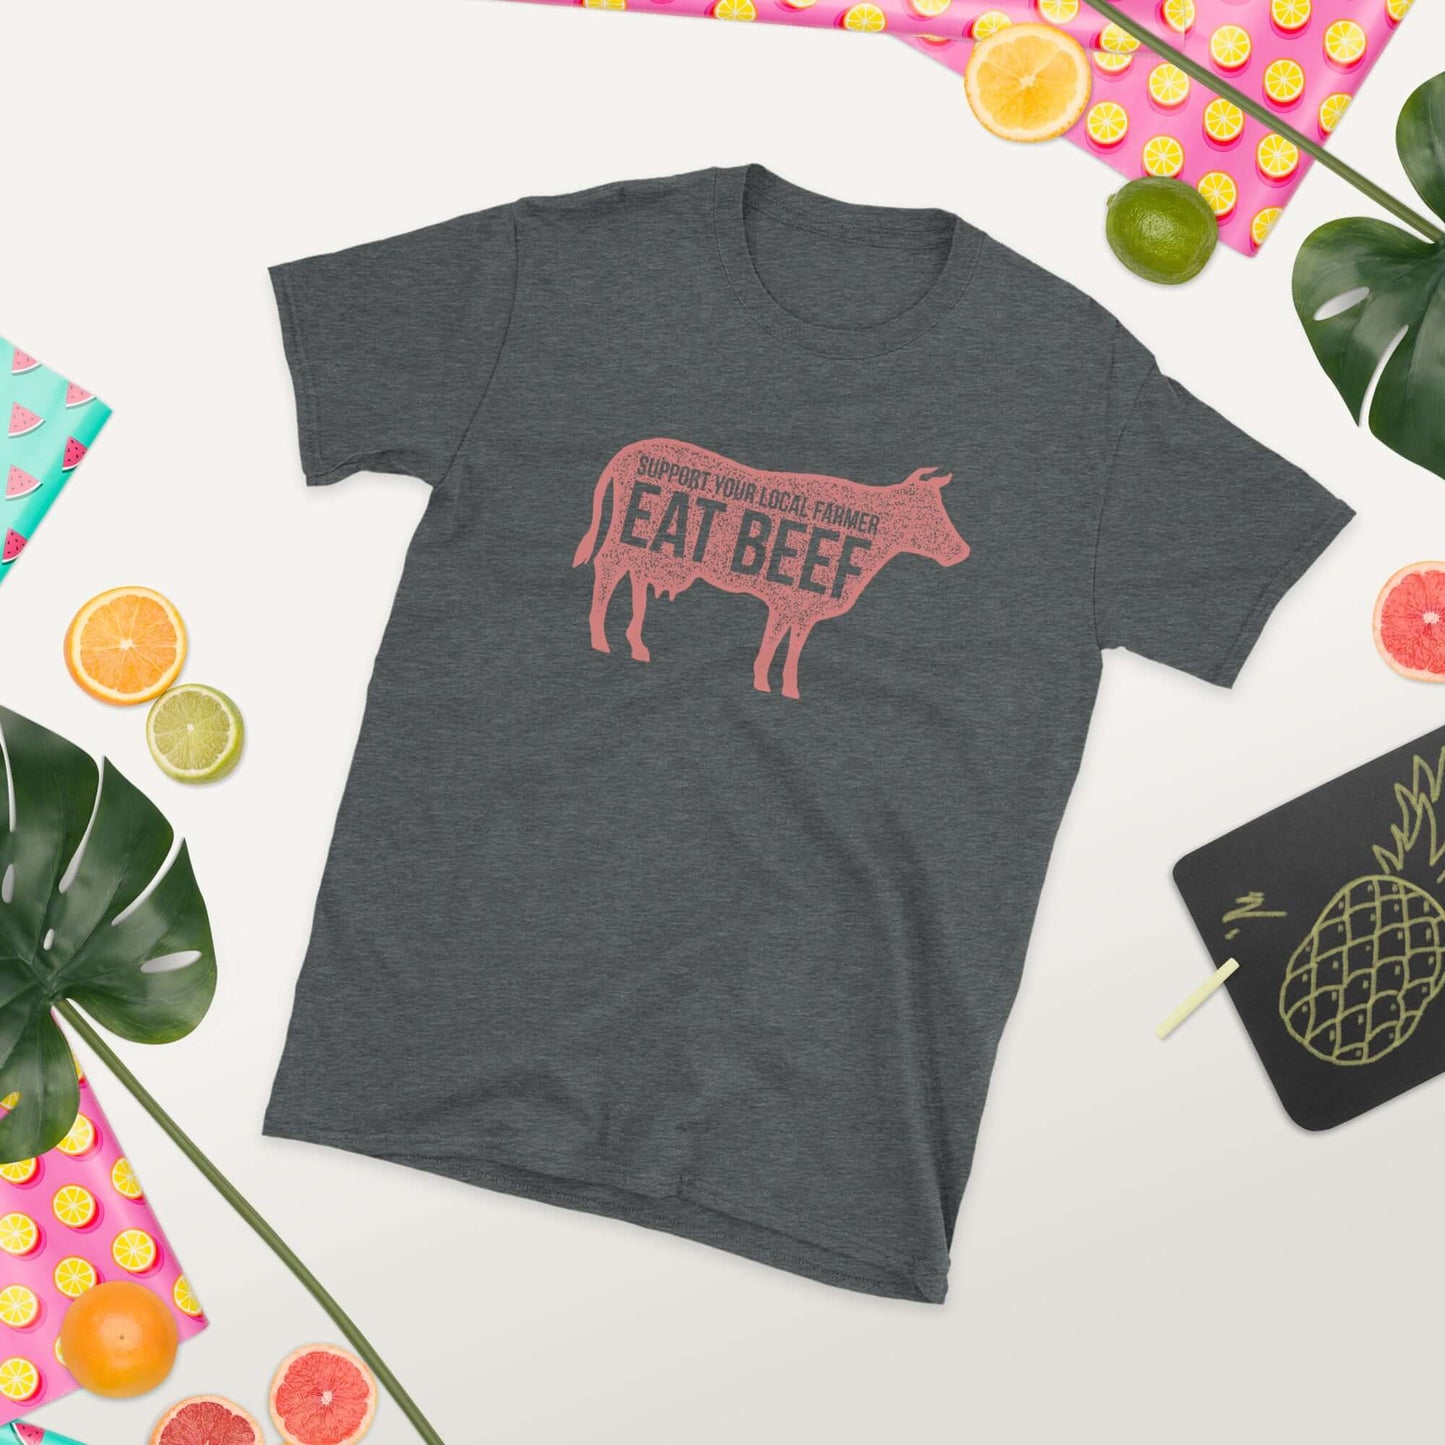 Support your Local Farmers Eat Beef  Short-Sleeve Unisex T-Shirt